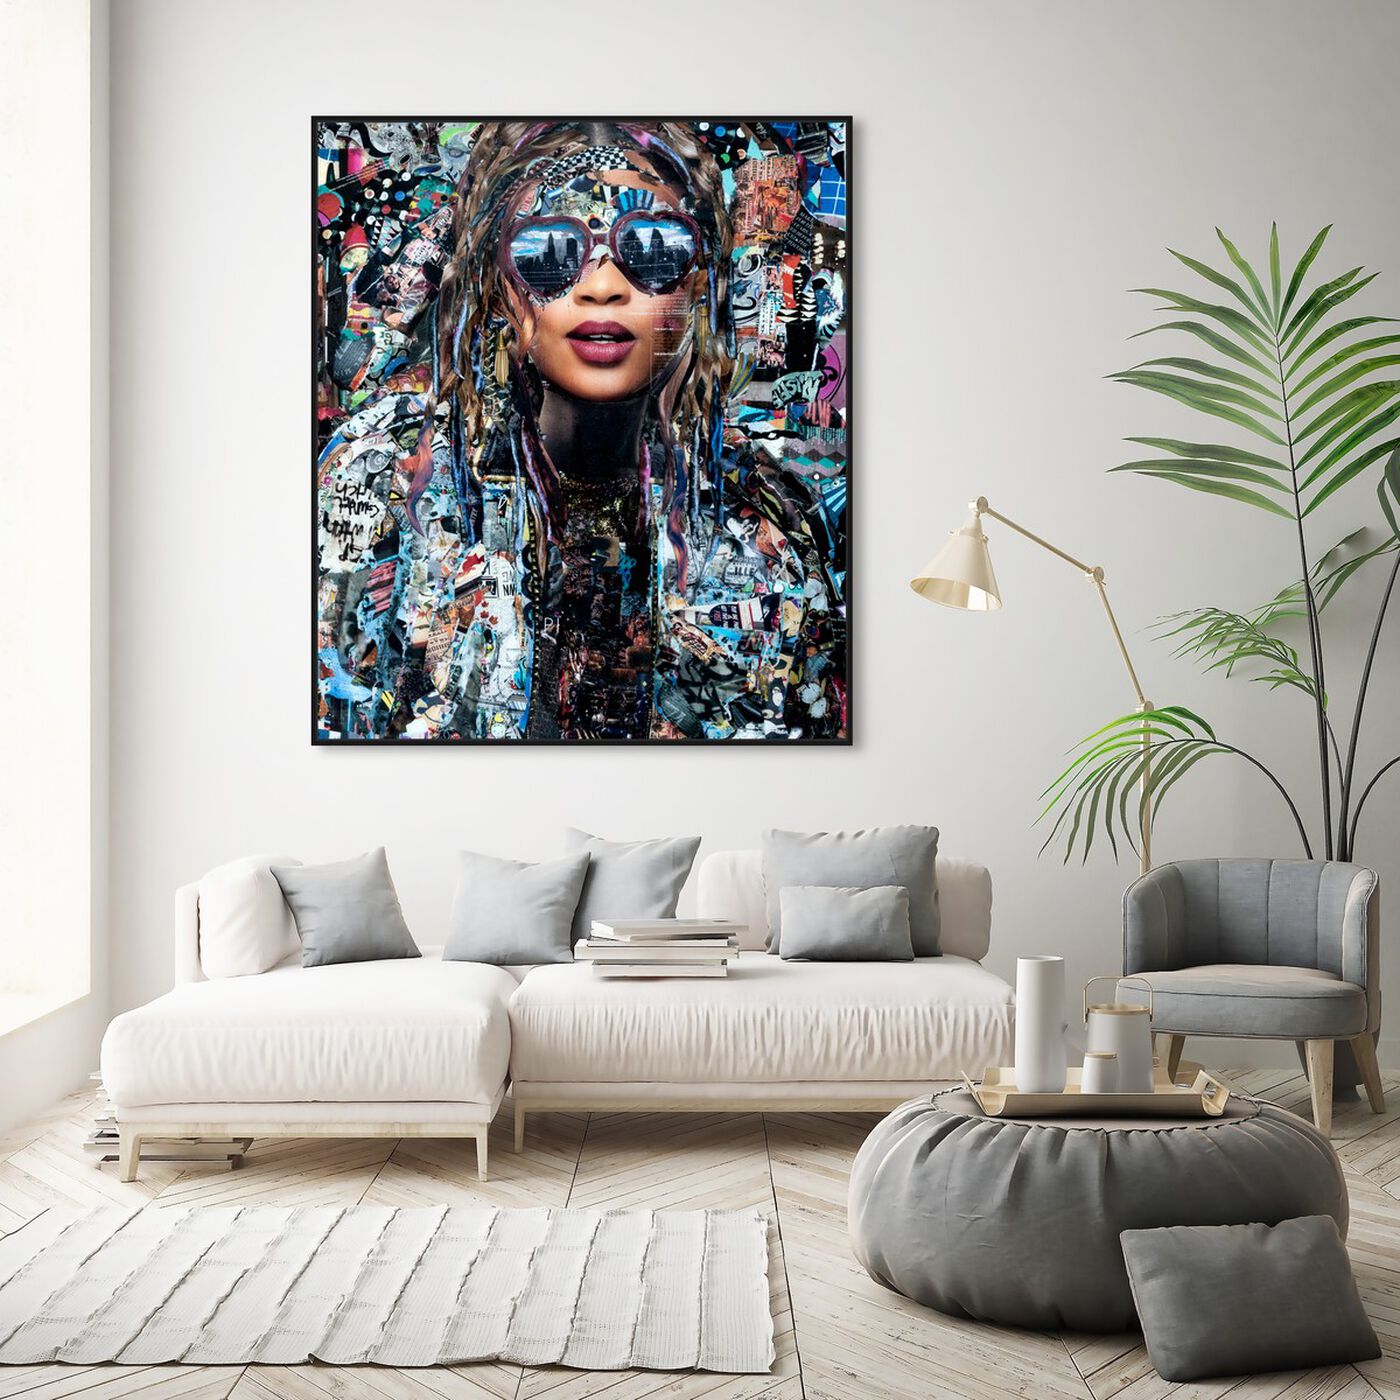 Hanging view of Katy Hirschfeld - OnlyDreaming featuring fashion and glam and portraits art.